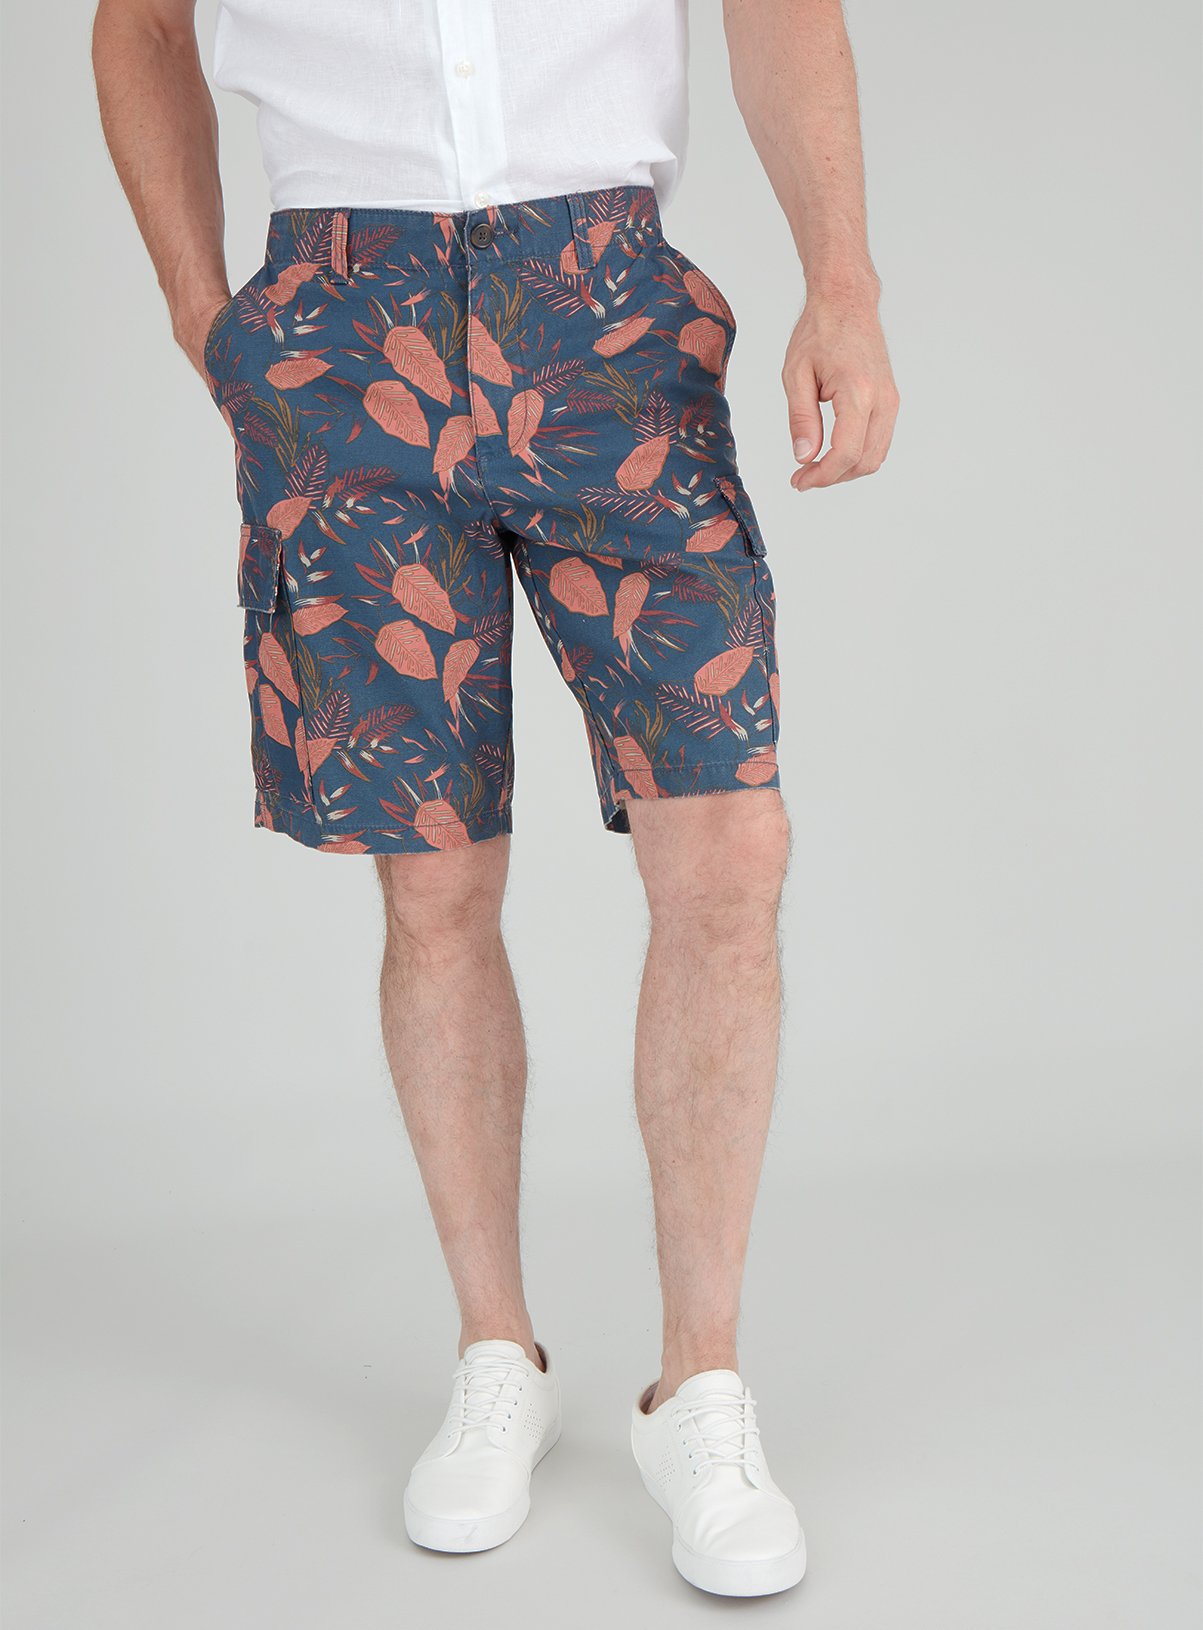 Navy Leaf Print Cargo Shorts Review